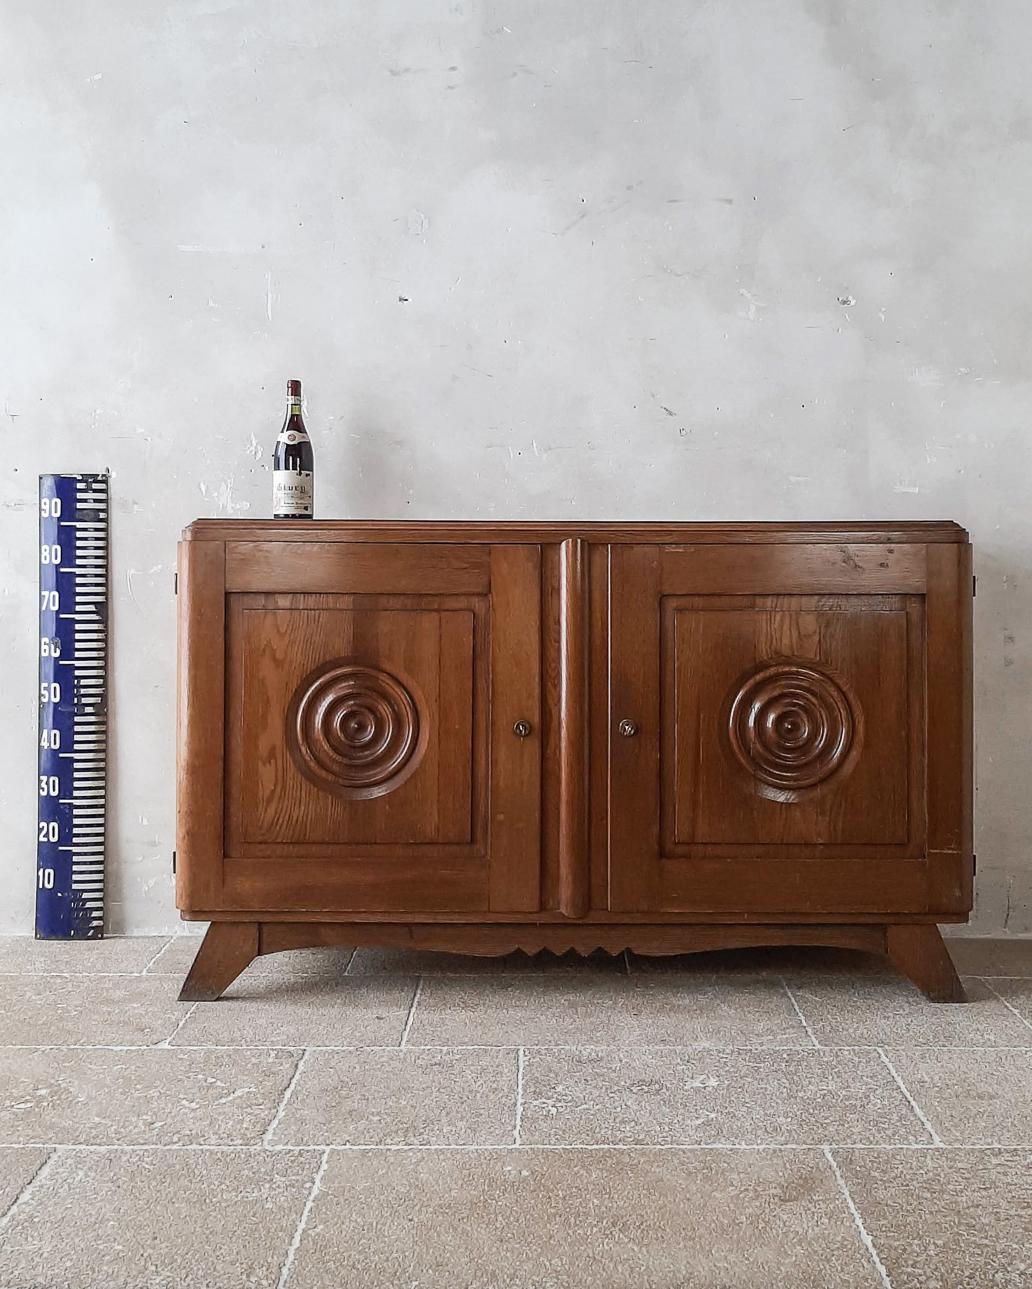 Brown oak sideboard by Charles Dudouyt from the 1940s, with two round panel doors.

Measures: h 91 x w 150 x d 45 cm.